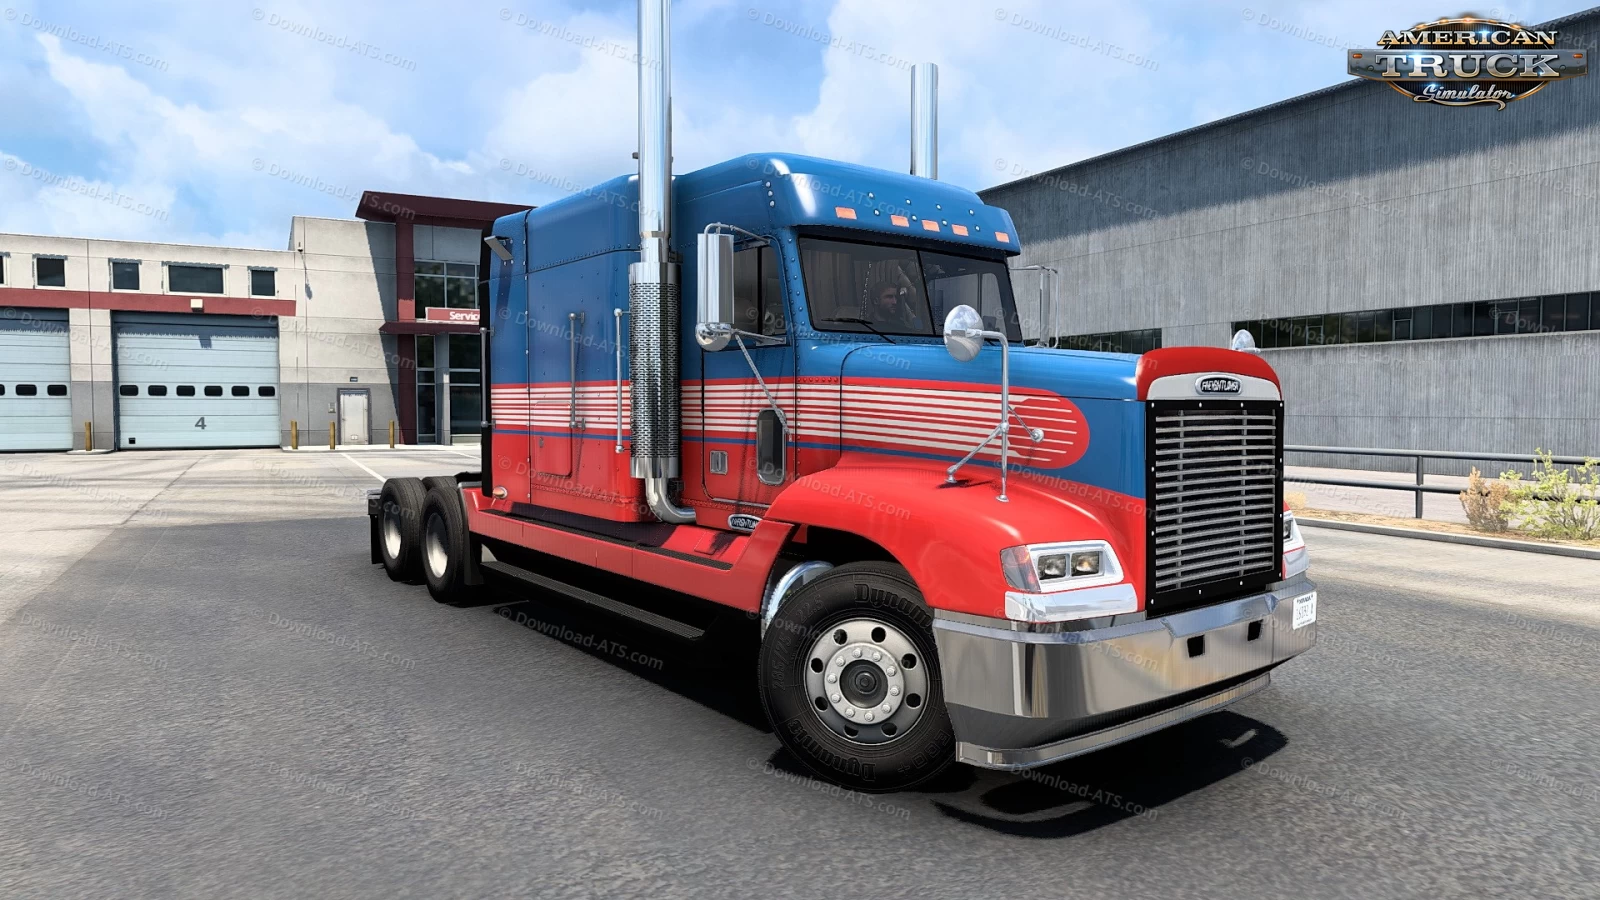 Freightliner FLD Truck v3.0 by odd_fellow (1.46.x) for ATS